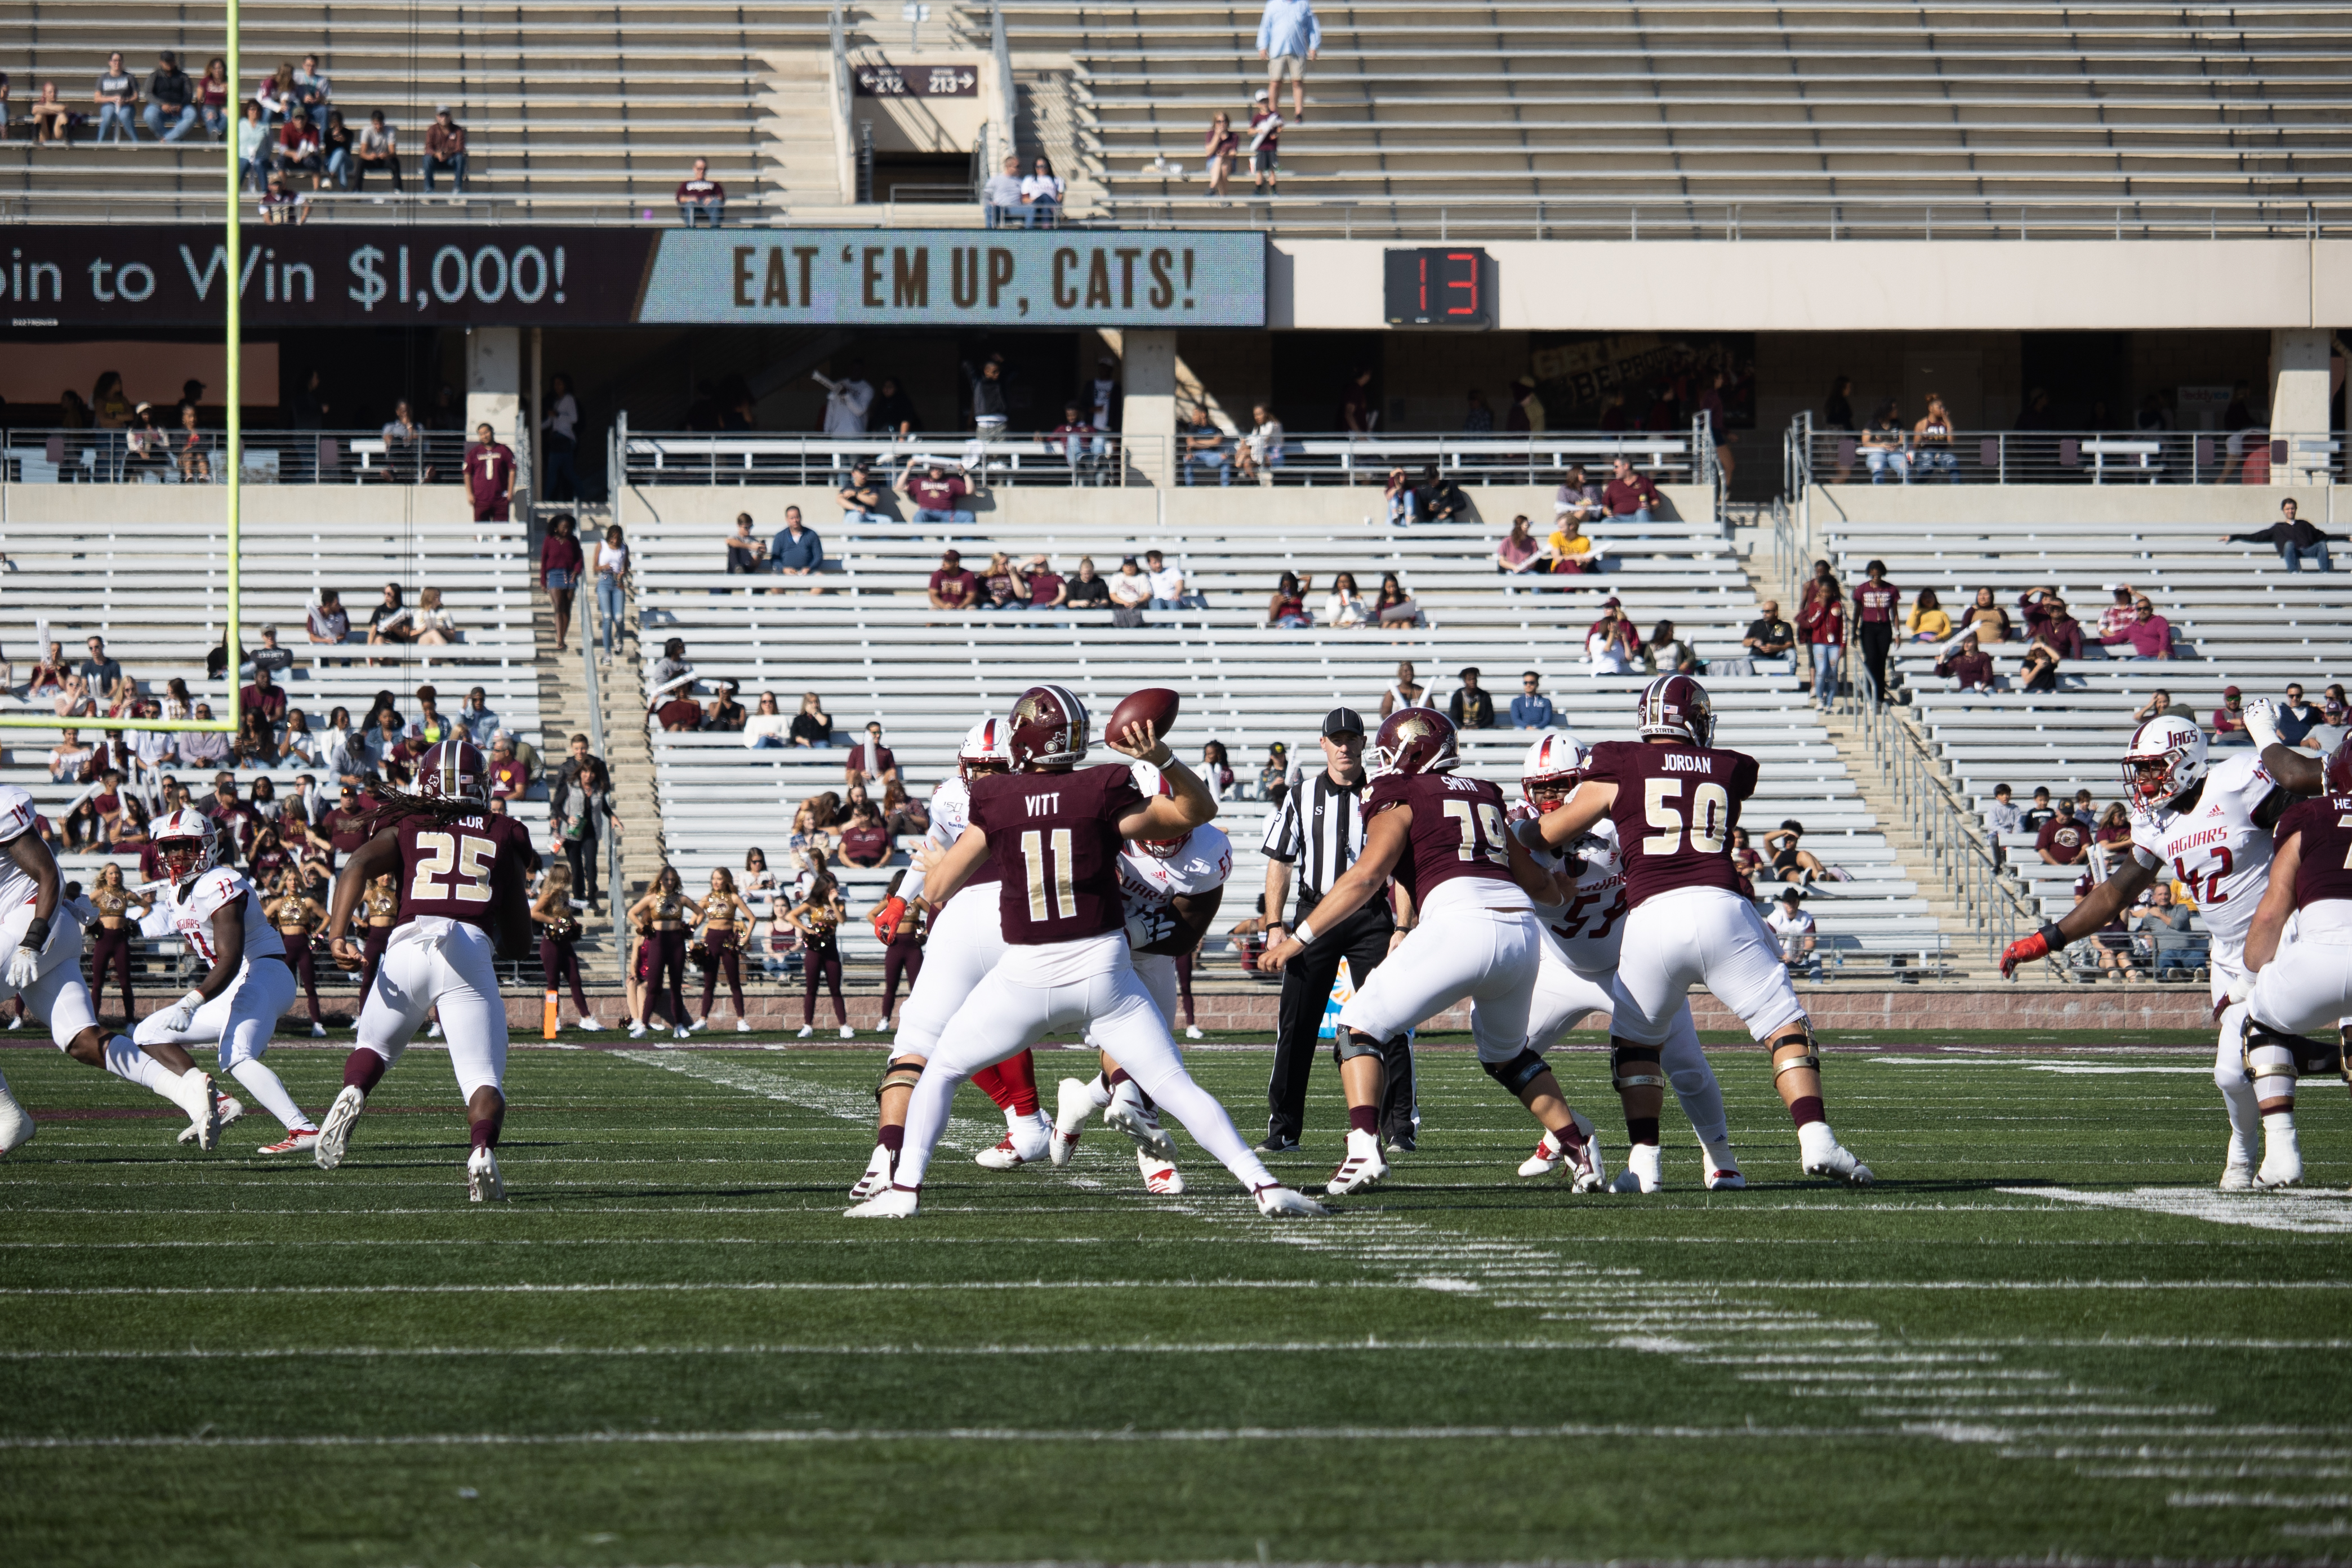 Quarterback Tyler Vitt is throwing the football off to the left behind his offensive line.